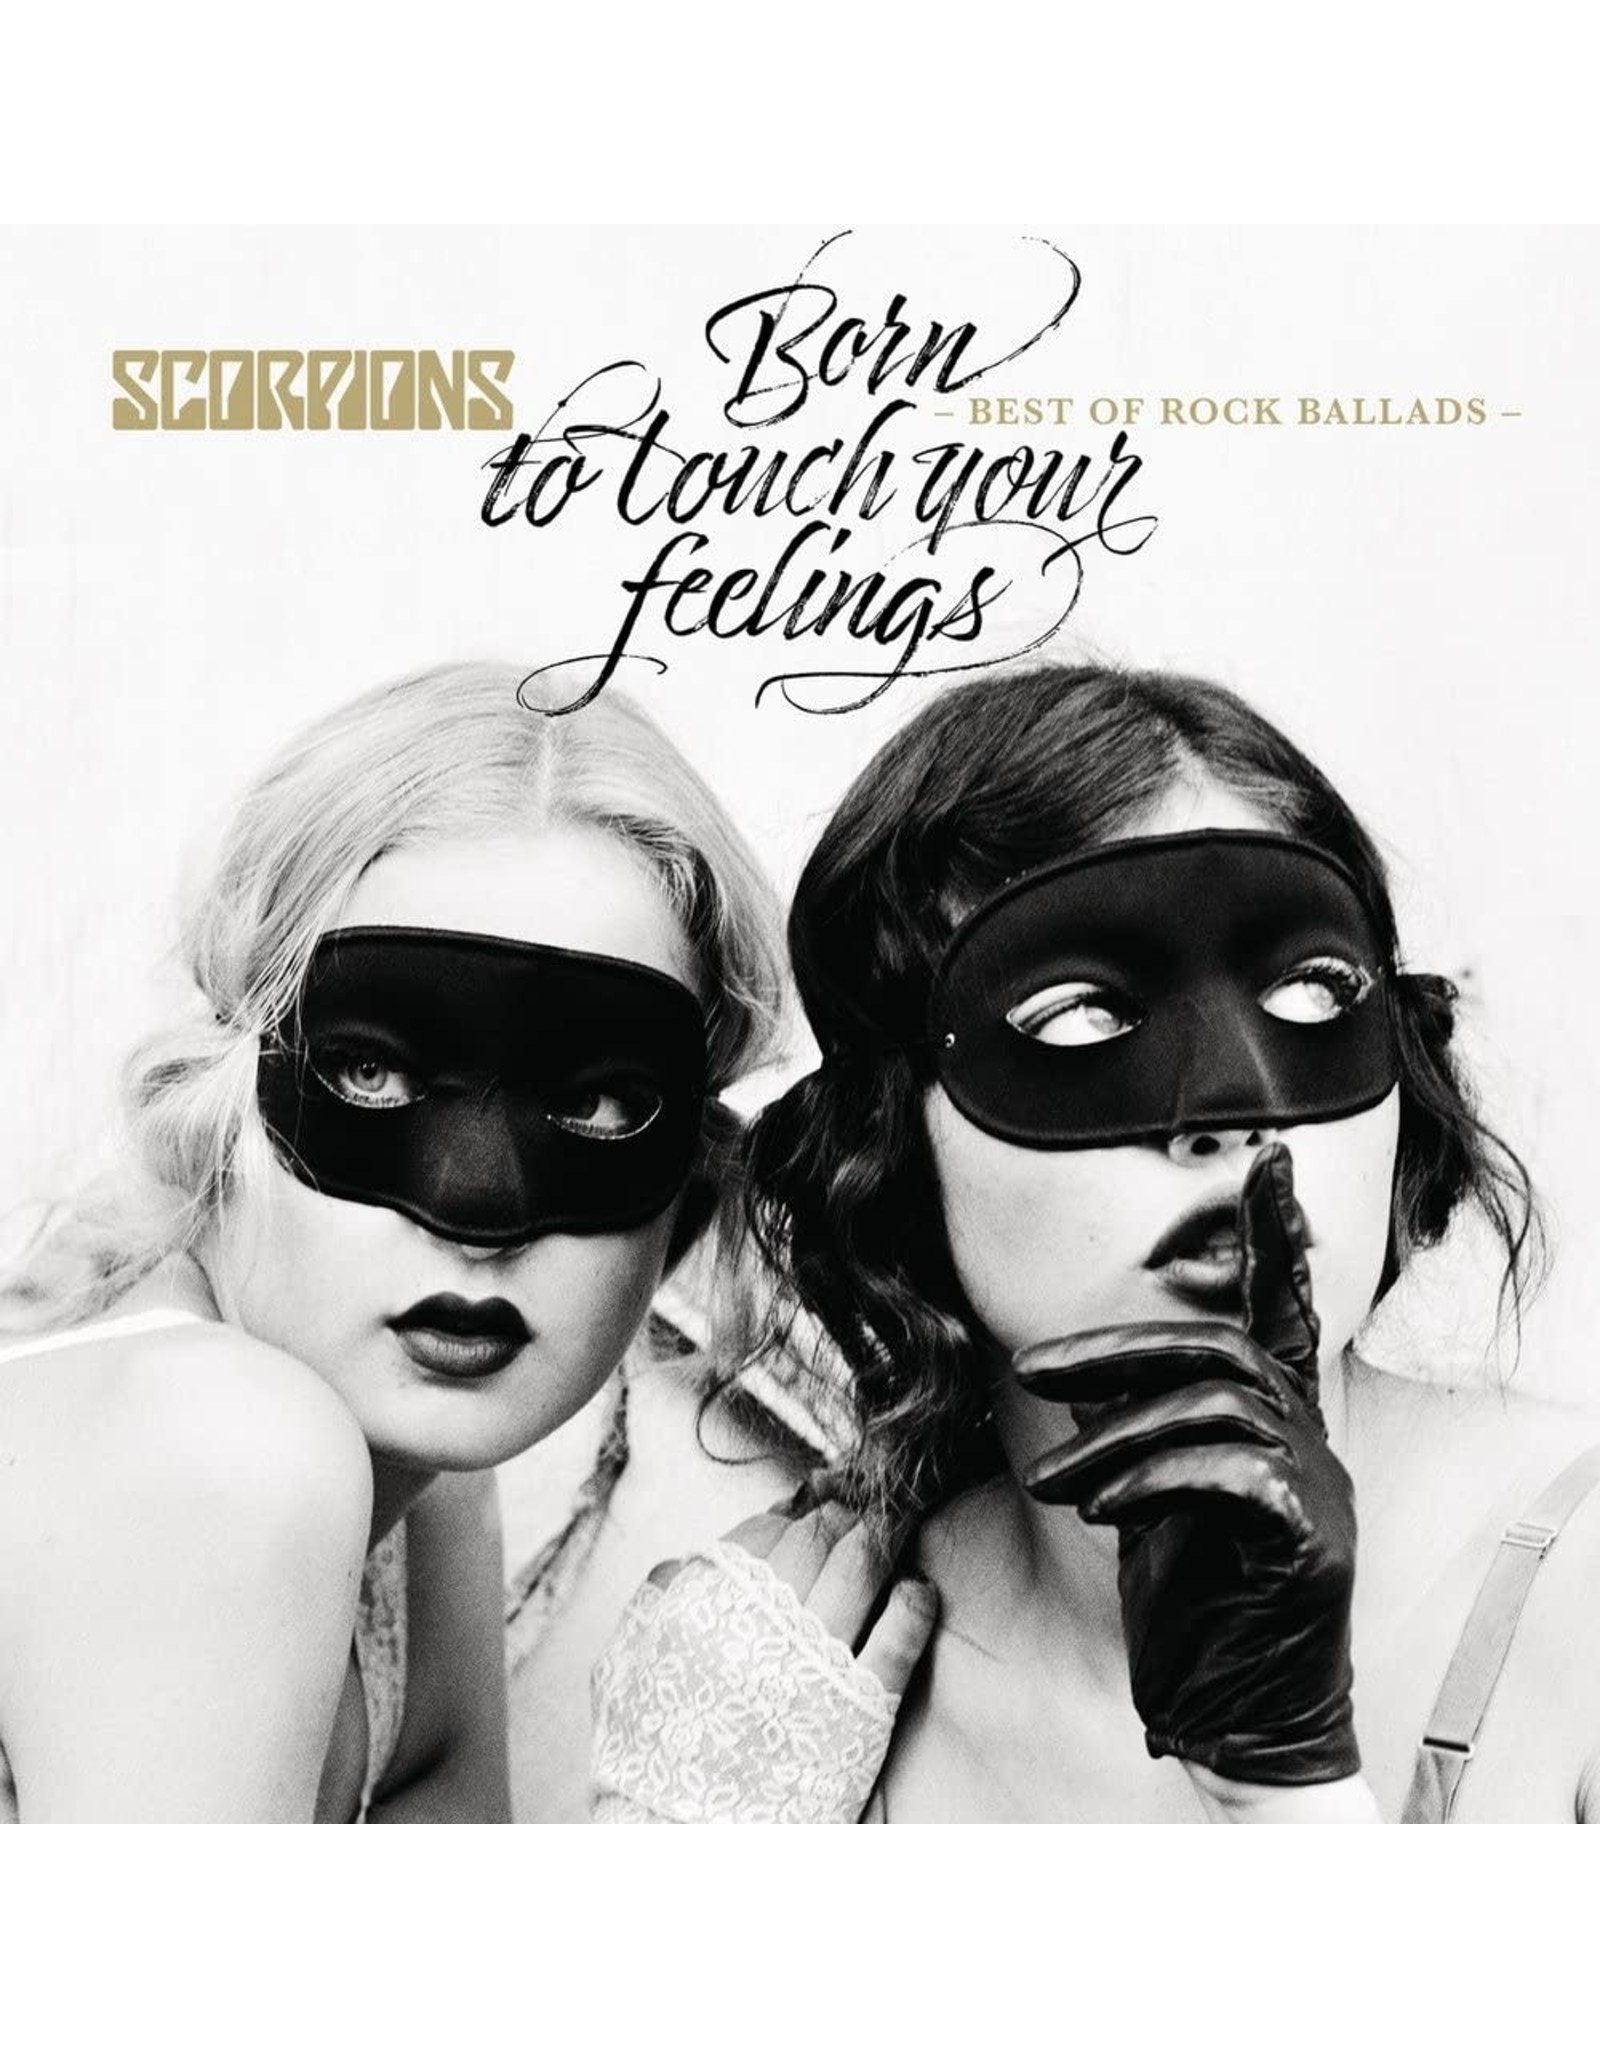 Scorpions - Born To Touch Your Feelings: Best Of Rock Ballads